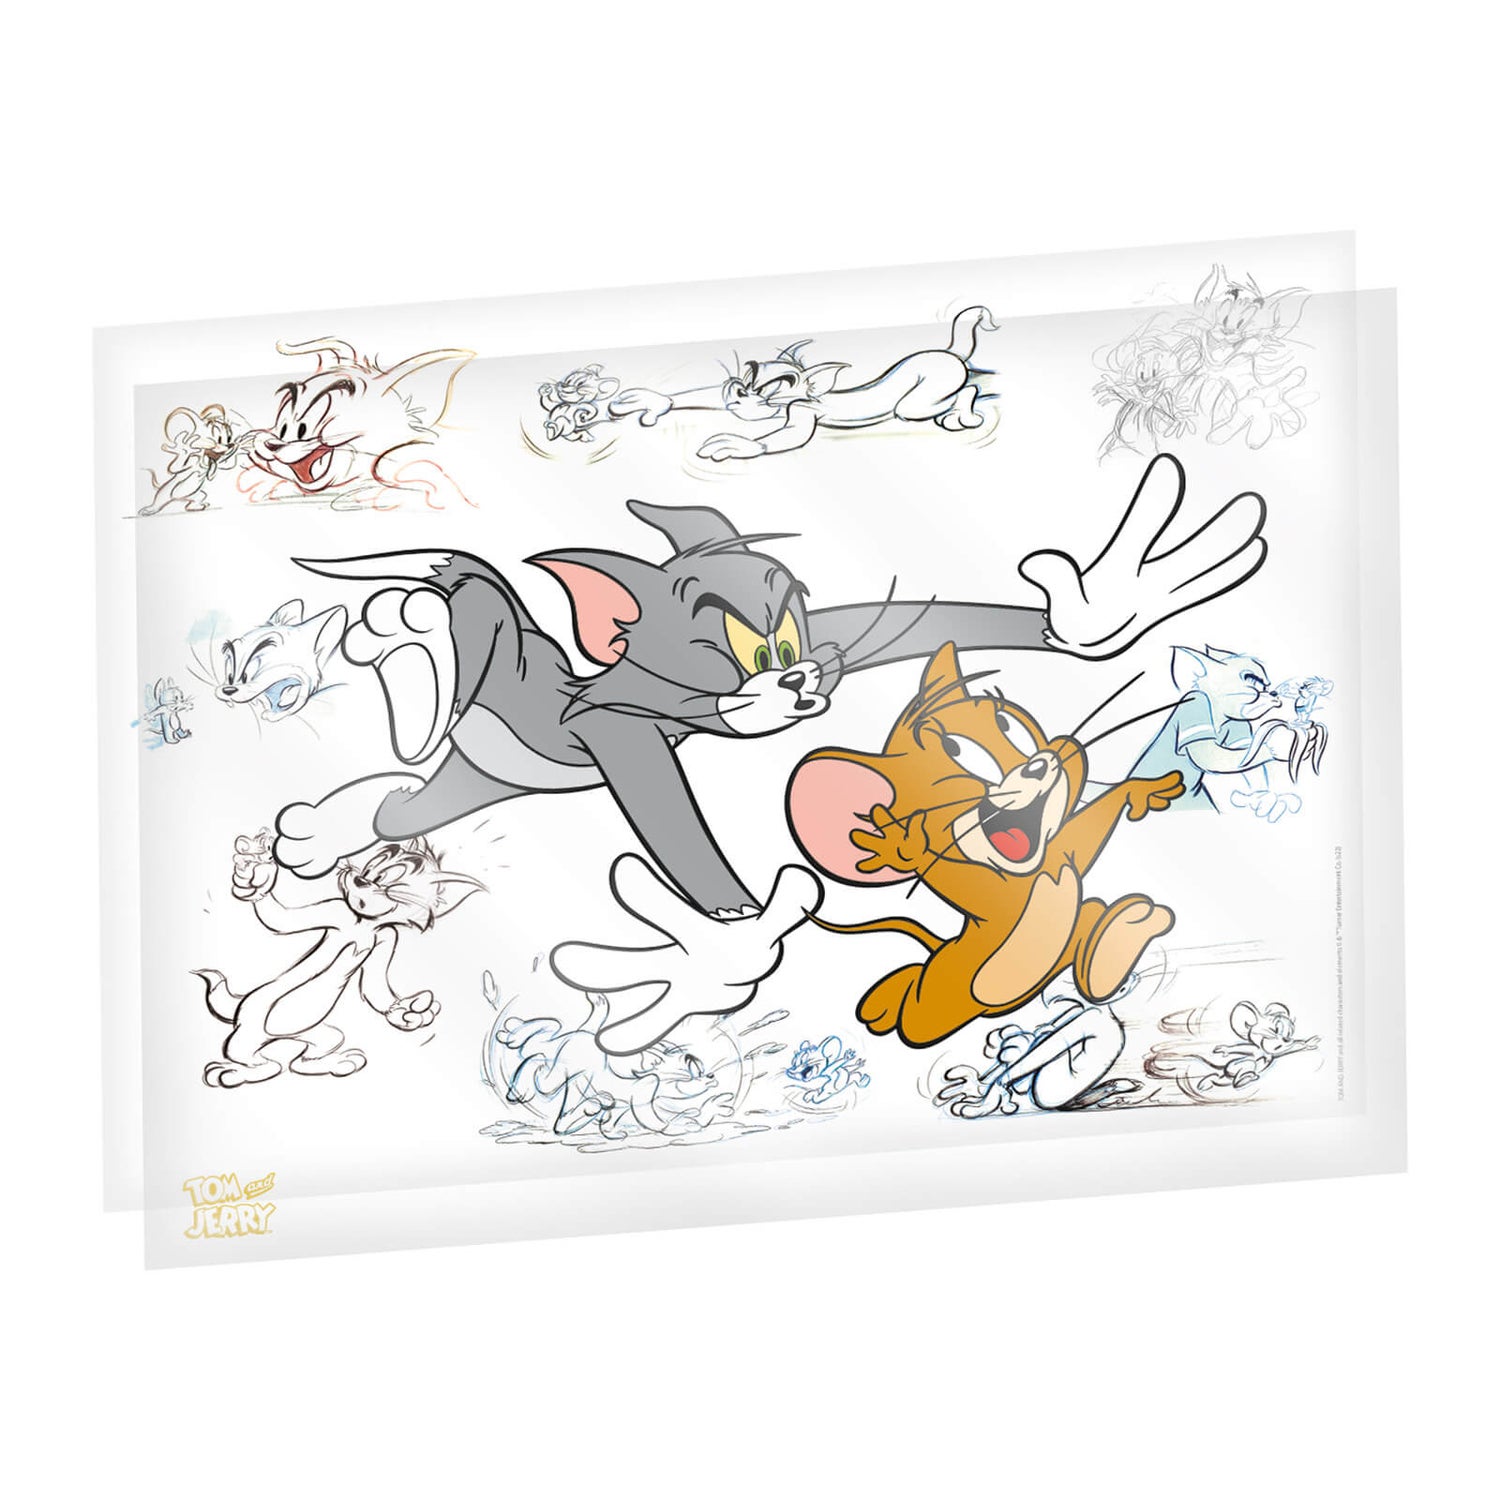 Fan-Cel Tom & Jerry Limited Edition Cell Artwork